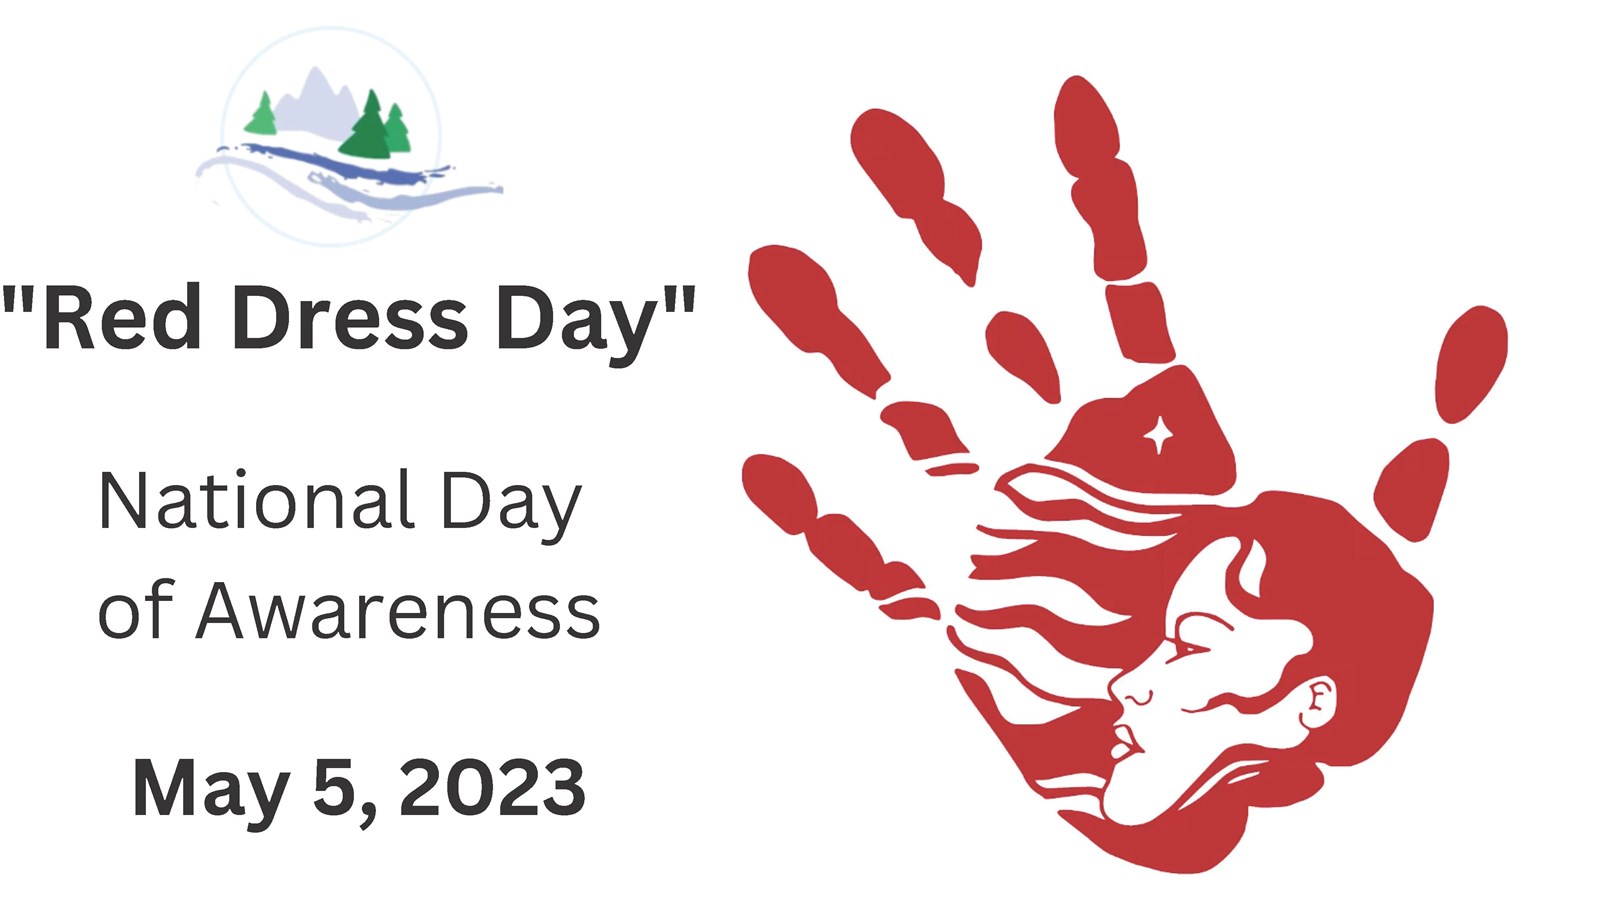 National Day of Awareness "Red Dress Day" May 5